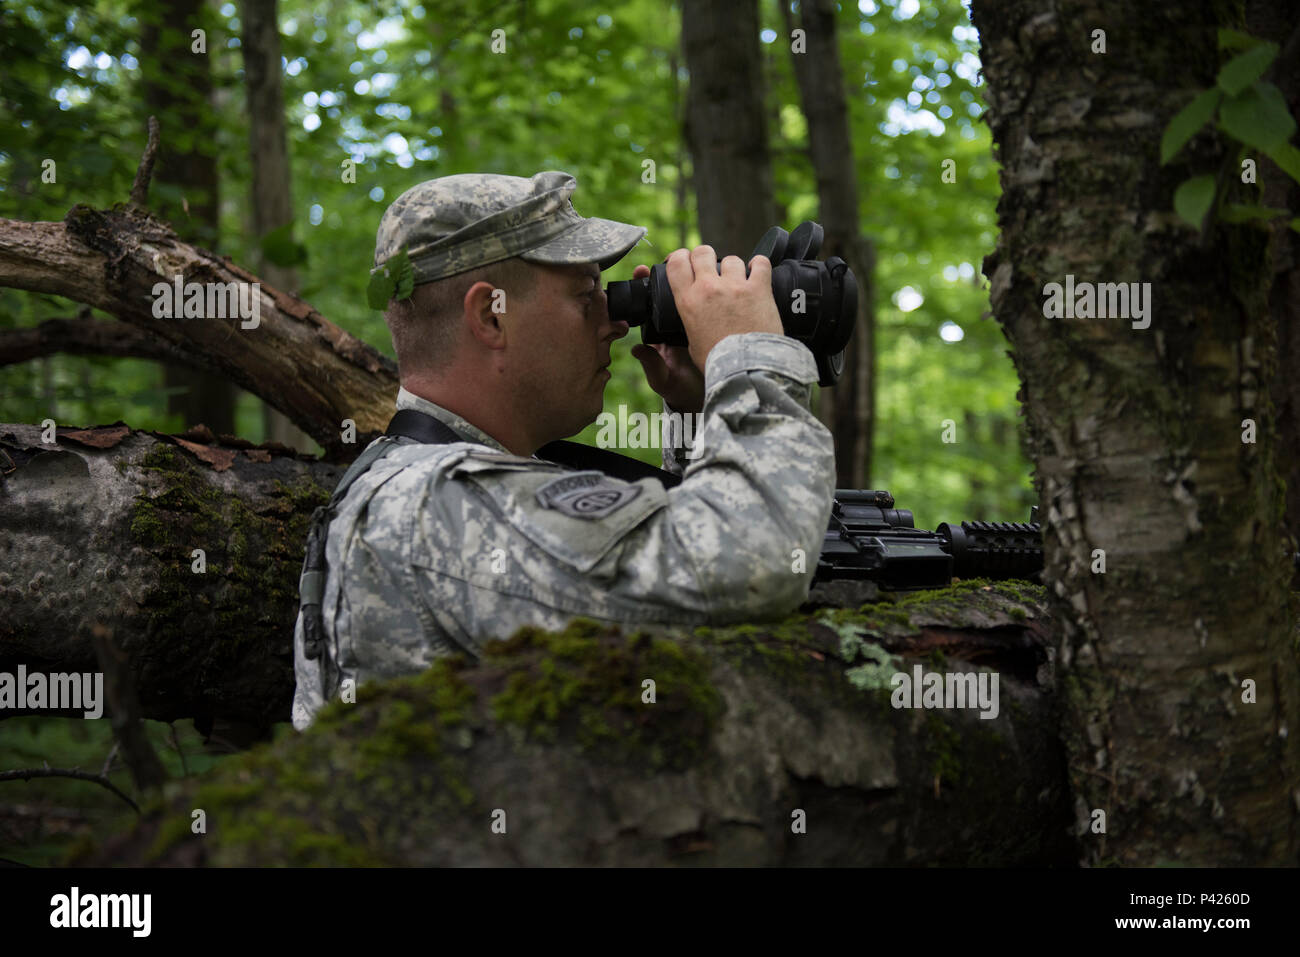 U.S. Army Sgt. Graham Skinner, a scout with Headquarters, Headquarters Company, 3rd Battalion, 172nd Infantry Regiment (Mountain), Vermont National Guard, monitors opposition forces during a reconnaissance training mission on Camp Ethan Allen Training Site, Jericho, Vt., June 6, 2016. Skinner’s company is participating in multiple training events over the next two weeks as part of their annual training. (U.S. Air National Guard photo by Tech. Sgt. Sarah Mattison/Released) Stock Photo